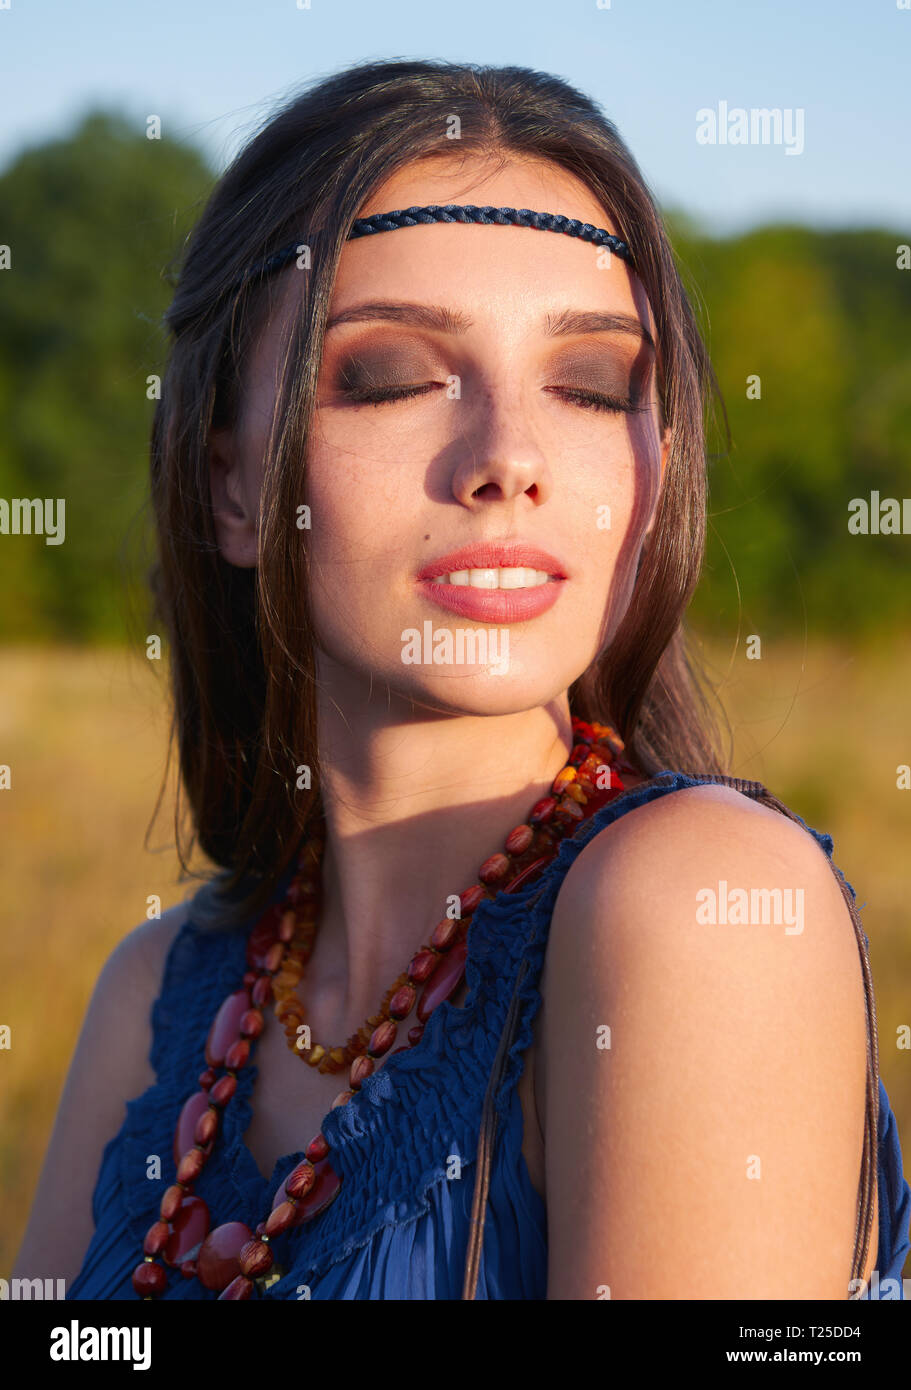 Close-up outdoor portrait of the lovely young boho (hippie) girl with ...